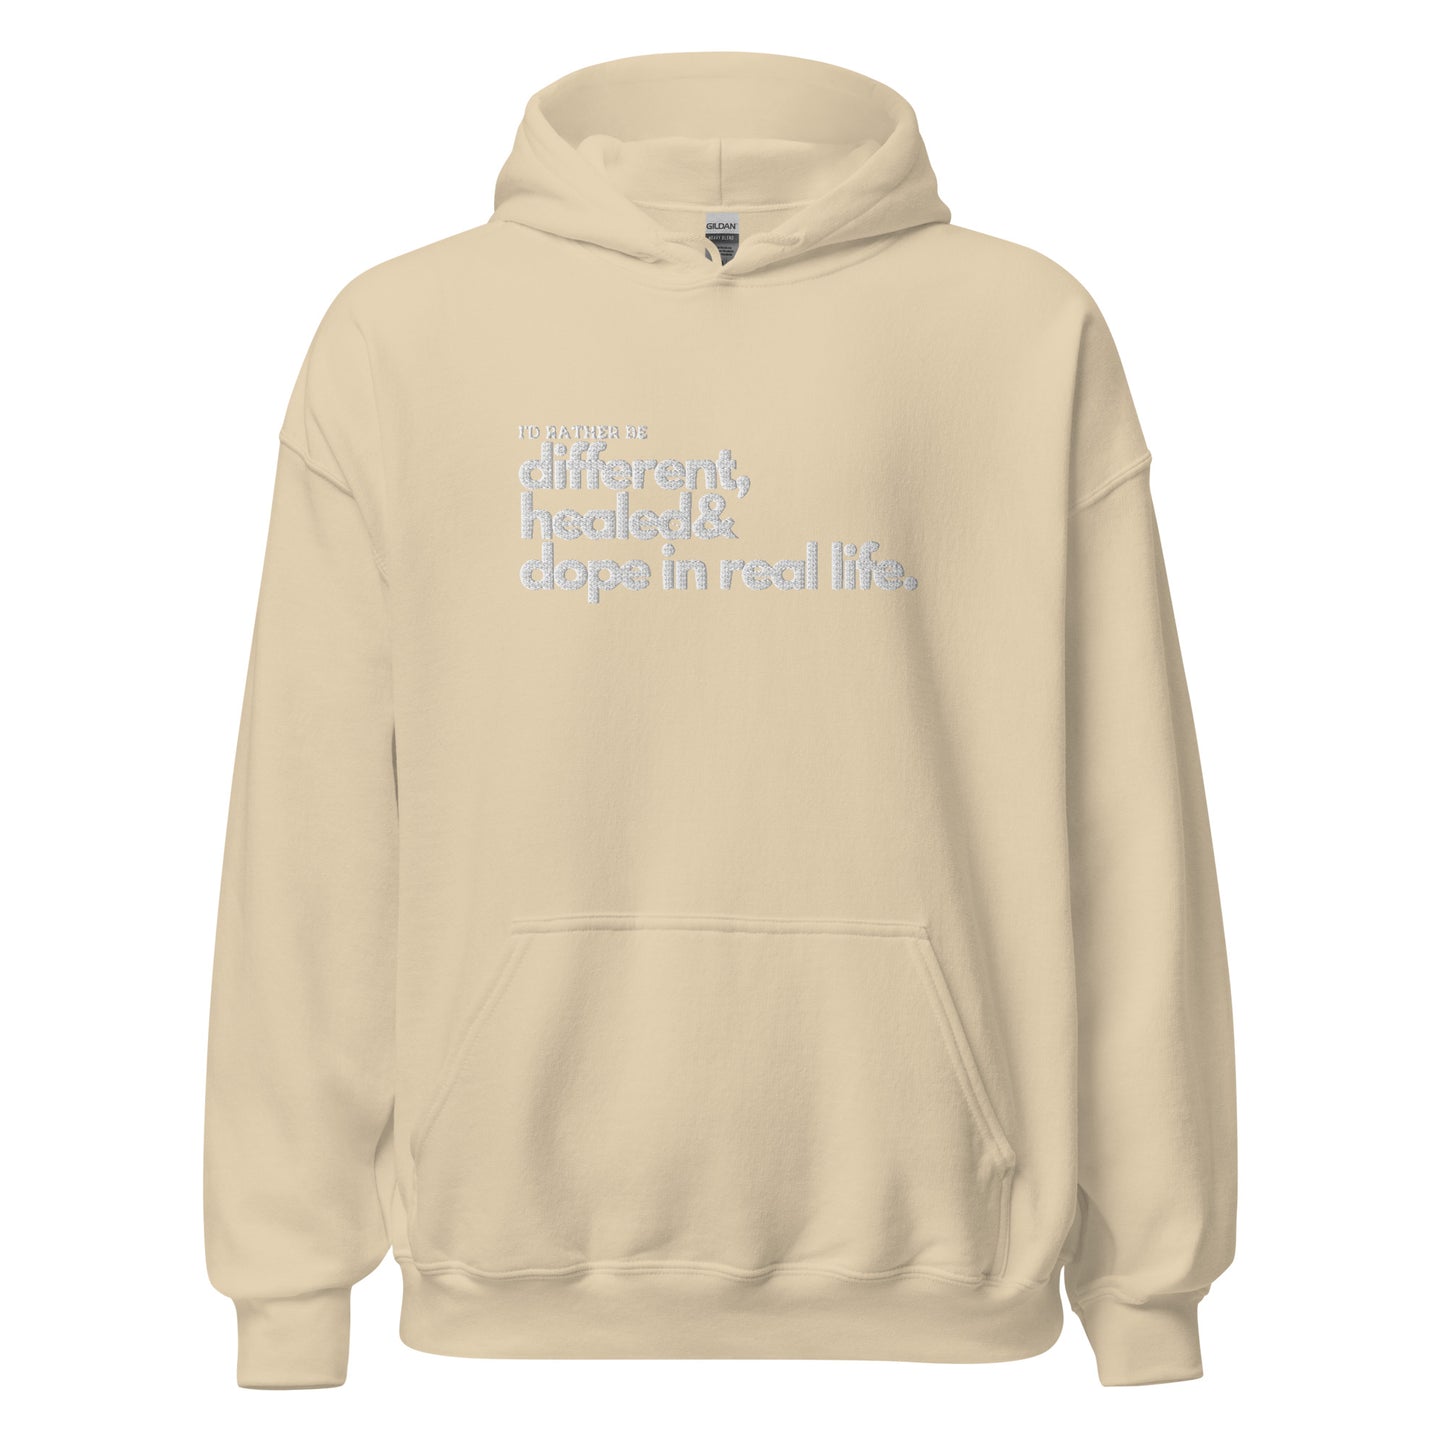 Unisex DHD Rather Be x 3 Hoodie